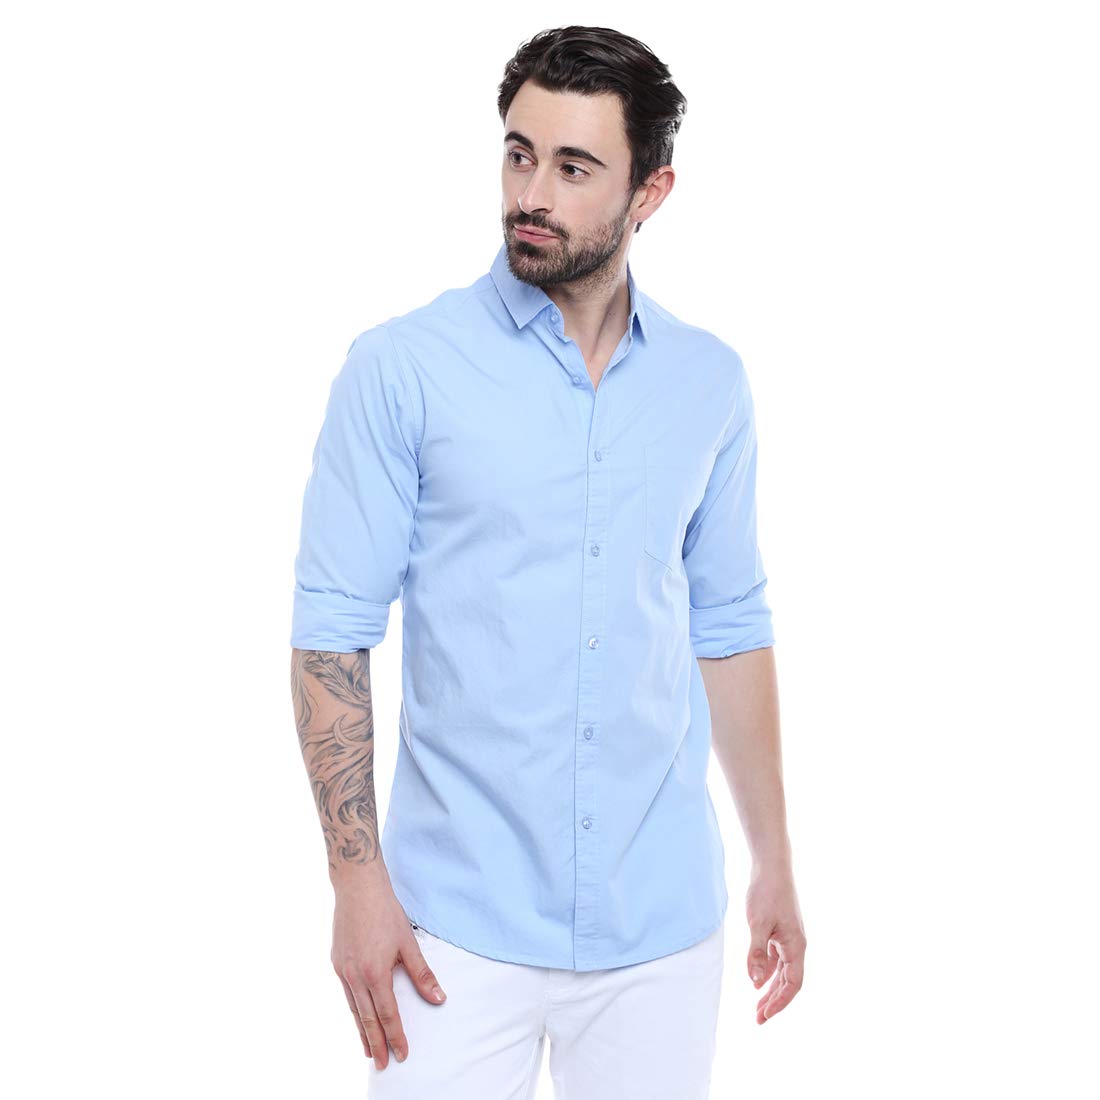 Men's Long Sleeve Dress Shirt Solid Slim Fit Casual Business Button Up Formal Shirts with Pocket The Orange Tags